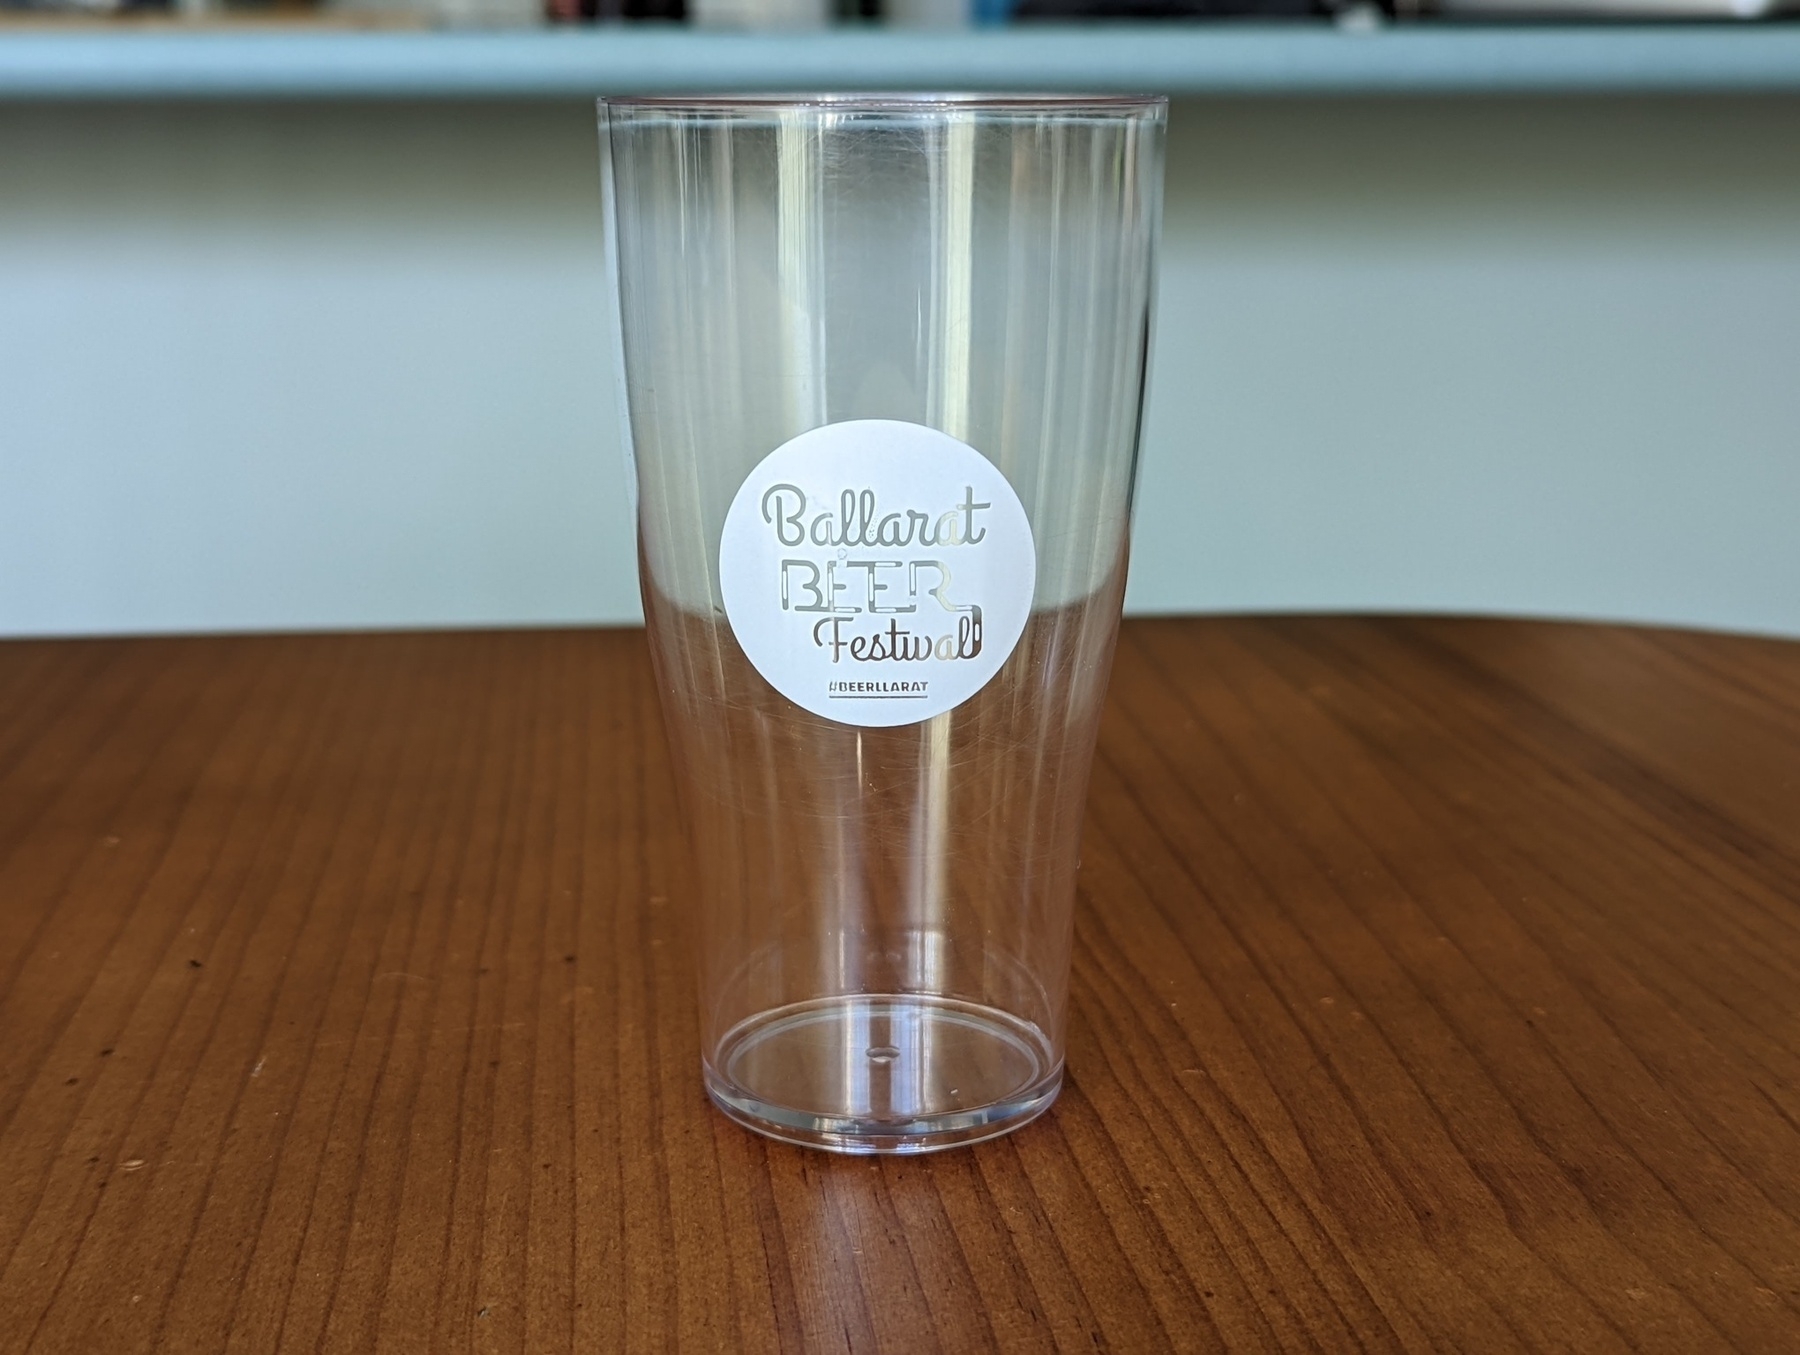 A pot glass with Ballarat Beer Festival on the front